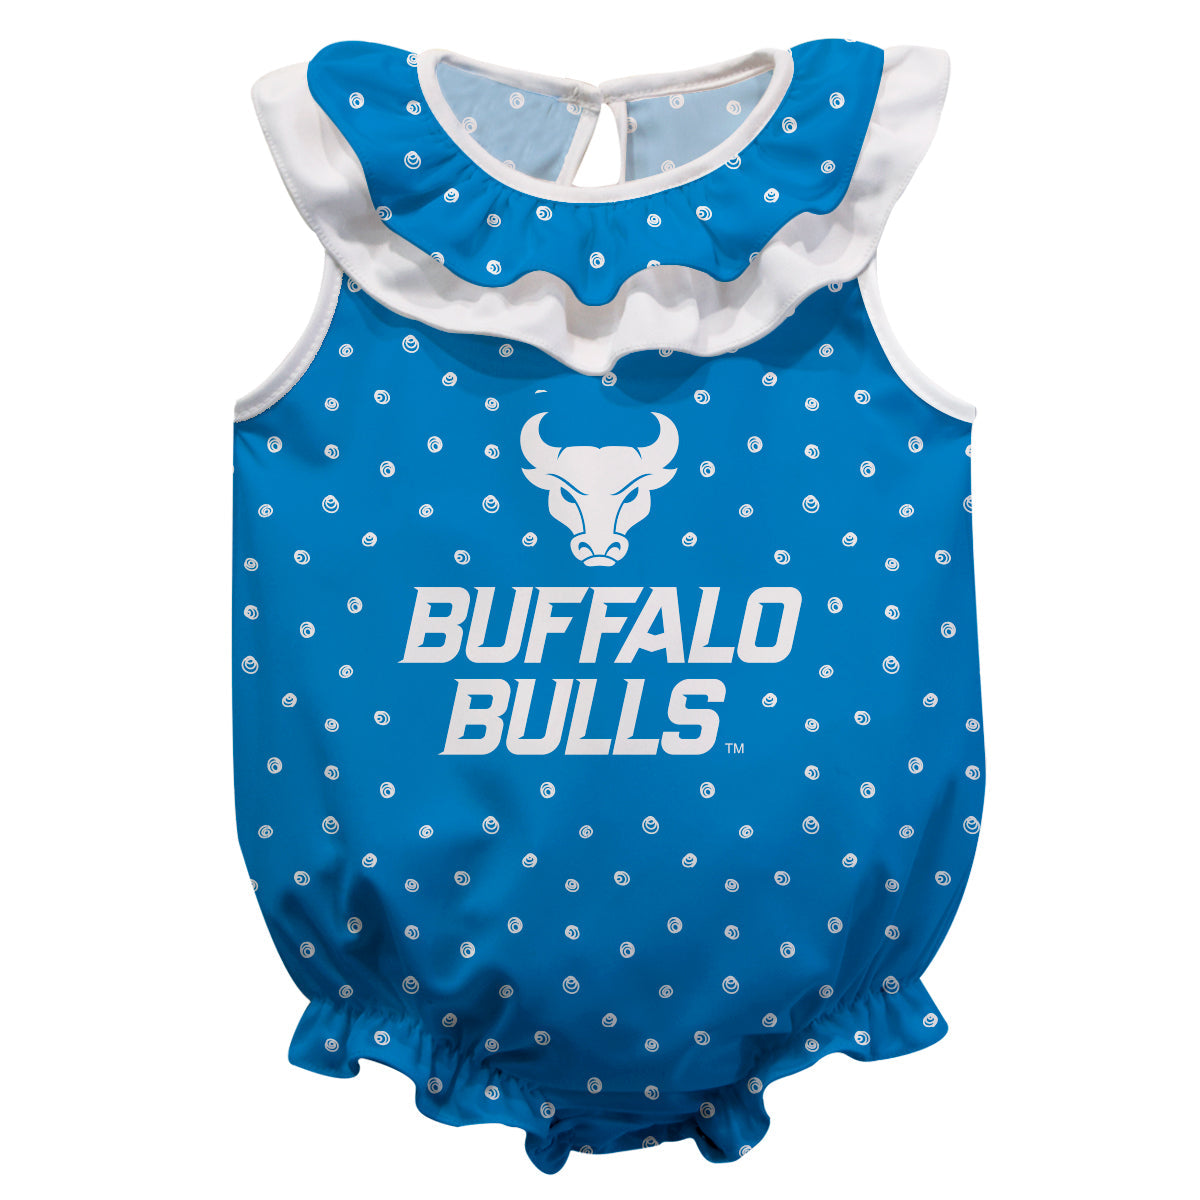 Buffalo Bulls Girls Game Day All Over Print Blue and White Sleeveless Ruffle One Piece Jumpsuit Mascot Bodysuit by Vive La Fete